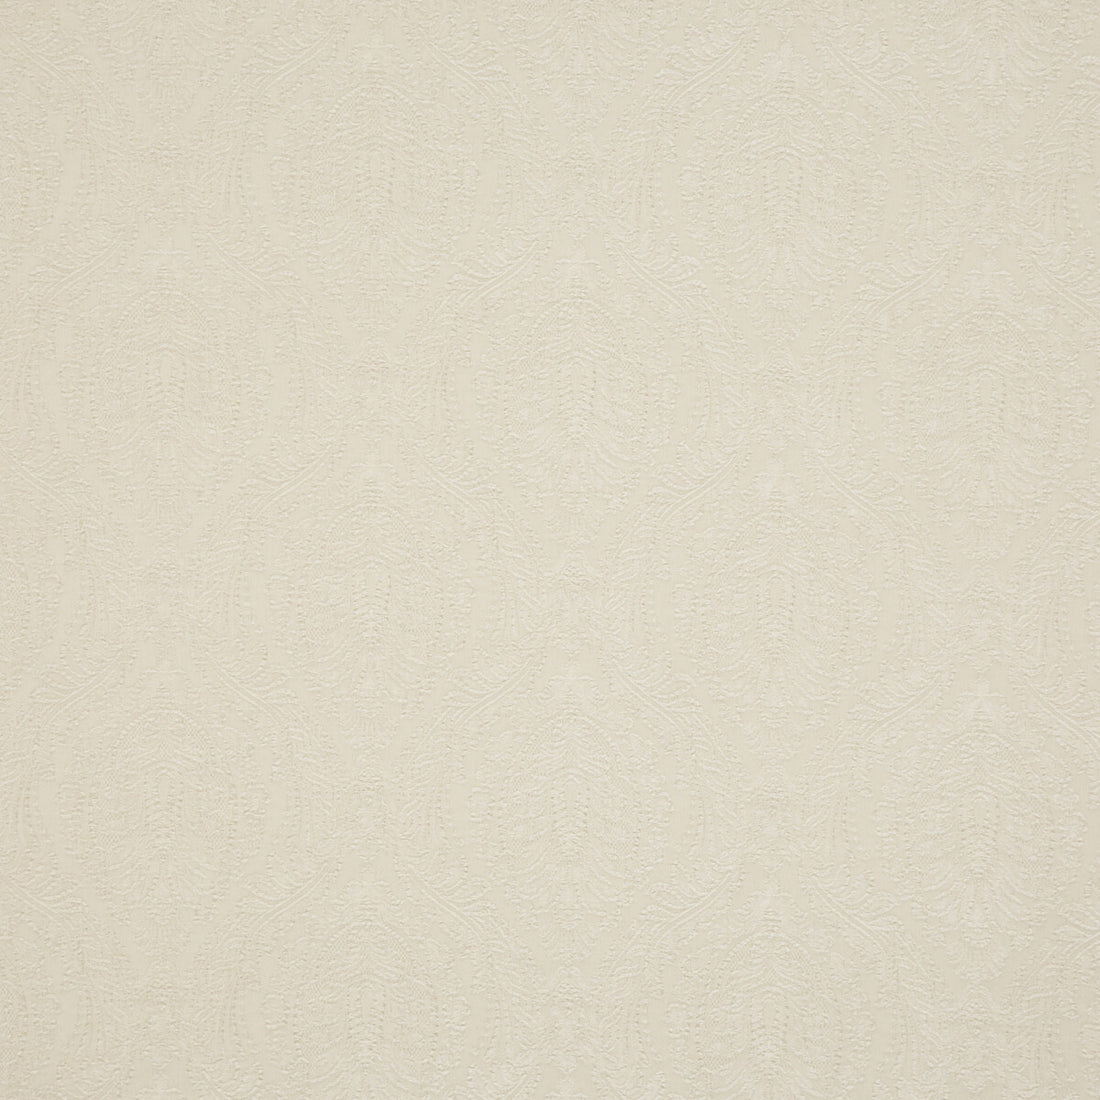 Pentire fabric in cream color - pattern BF10569.120.0 - by G P &amp; J Baker in the Artisan collection